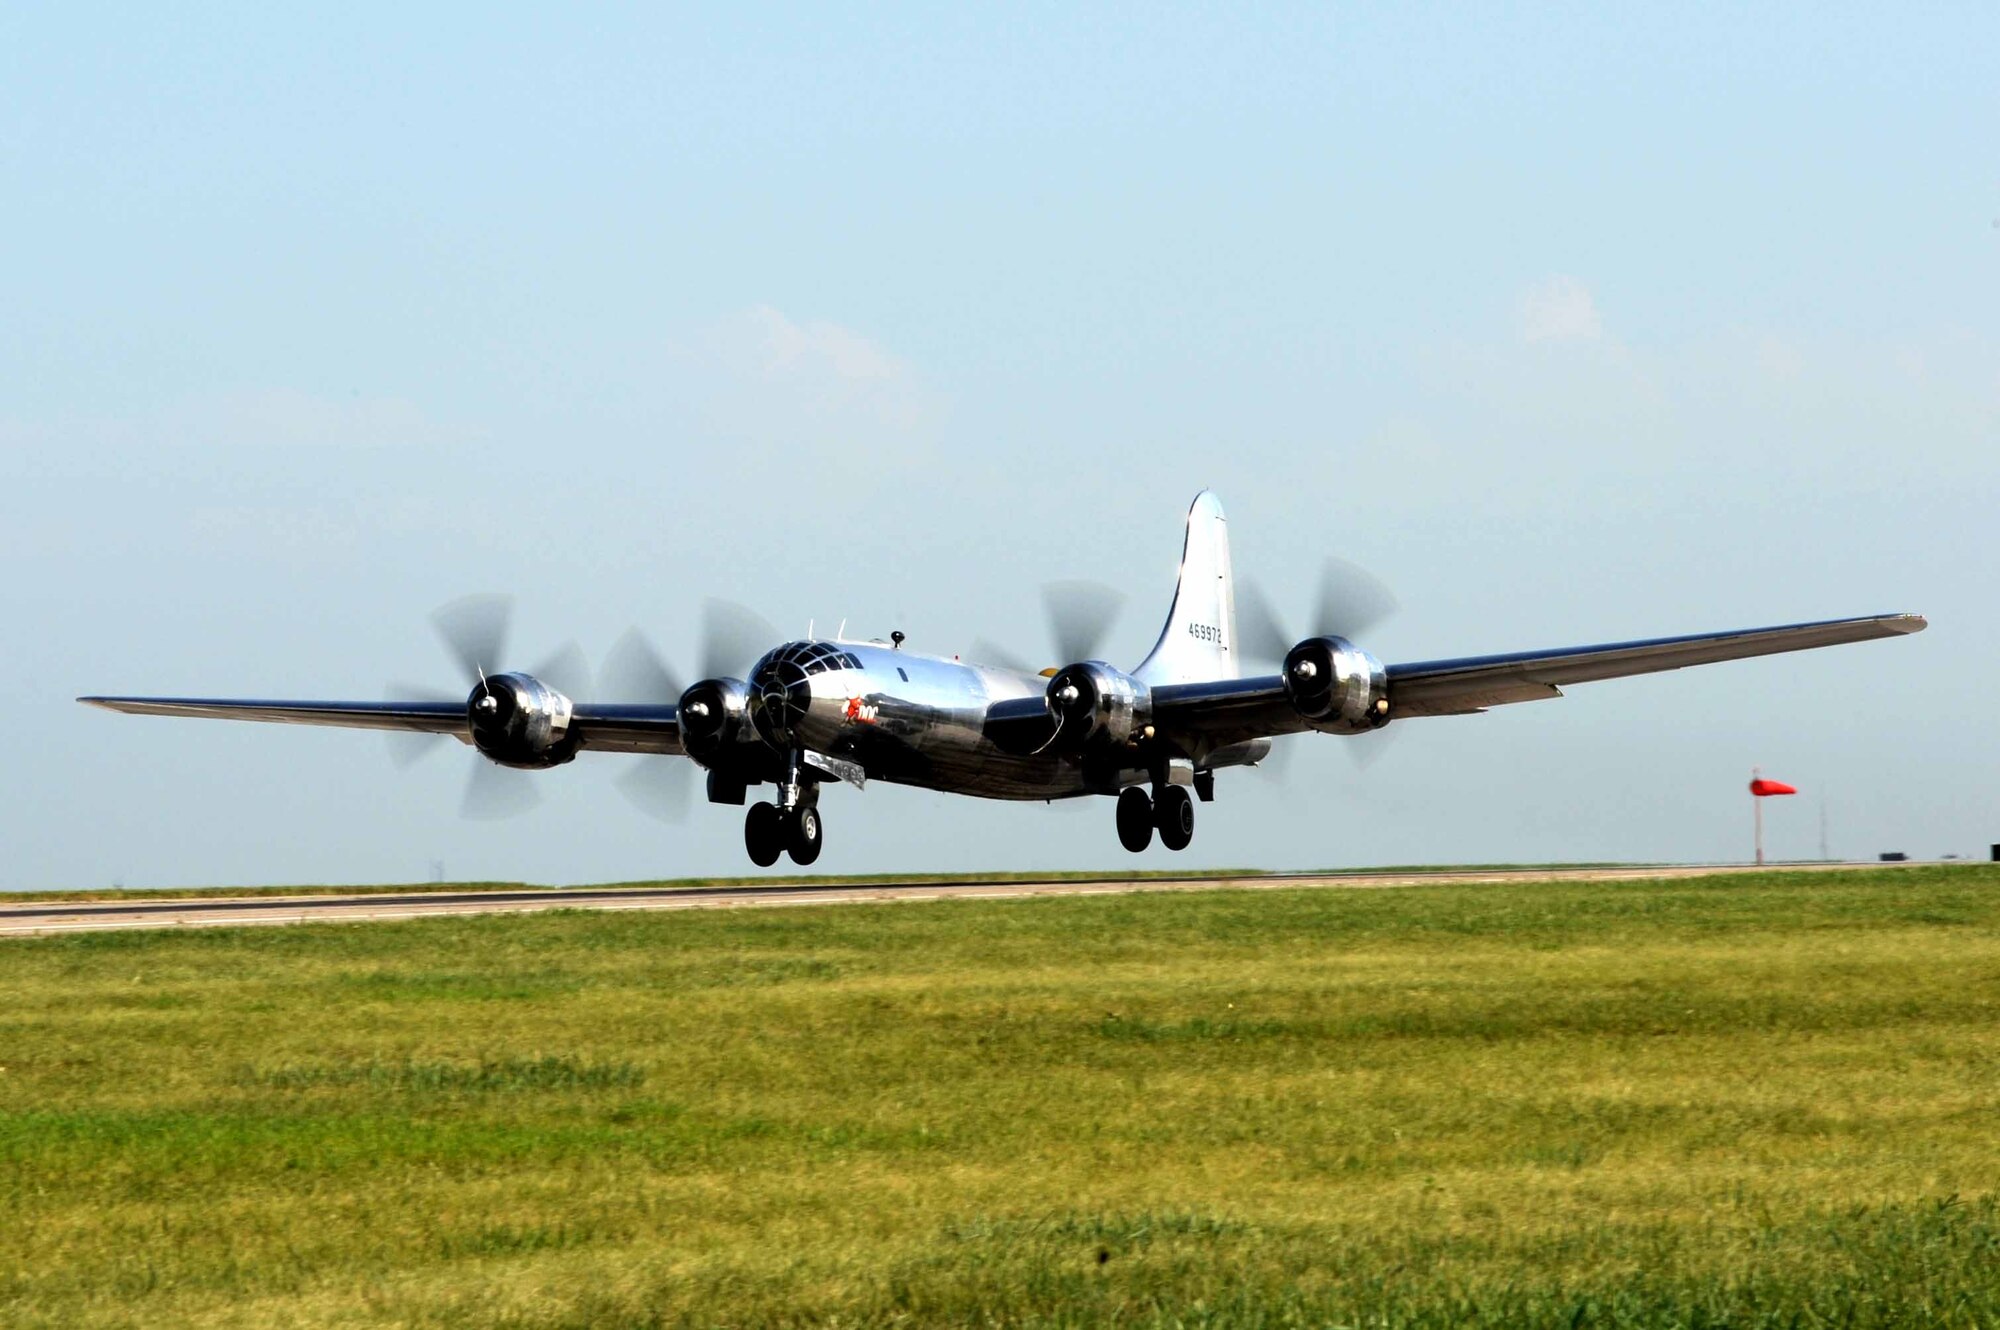 A B-29 Superfortress, known as ‘Doc,’ takes off for the first time in approximately 60 years, July 17, 2016, at McConnell Air Force Base, Kan. A restoration team worked on the aircraft for the last 16 years to prepare it for flight. (U.S Air Force photo/Airman 1st Class Jenna Caldwell)